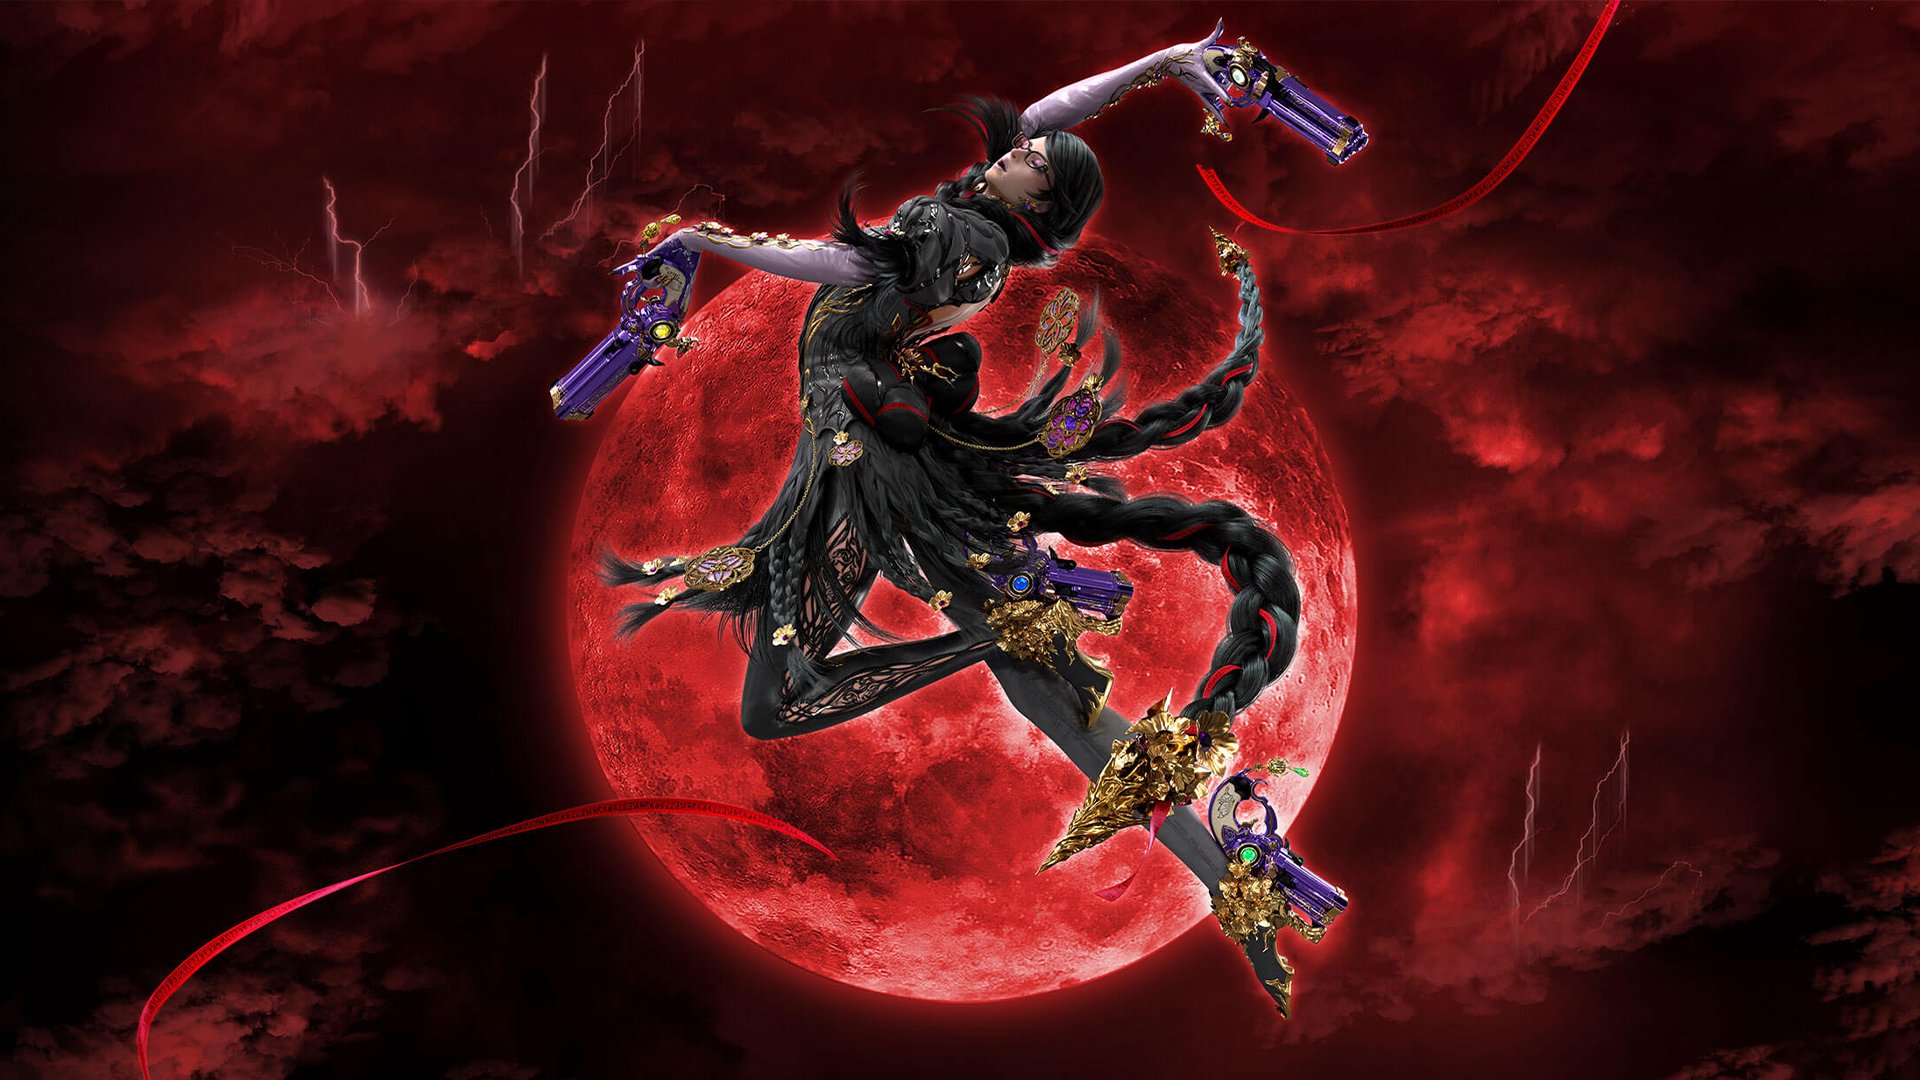 Bayonetta poses in the air with a red background.